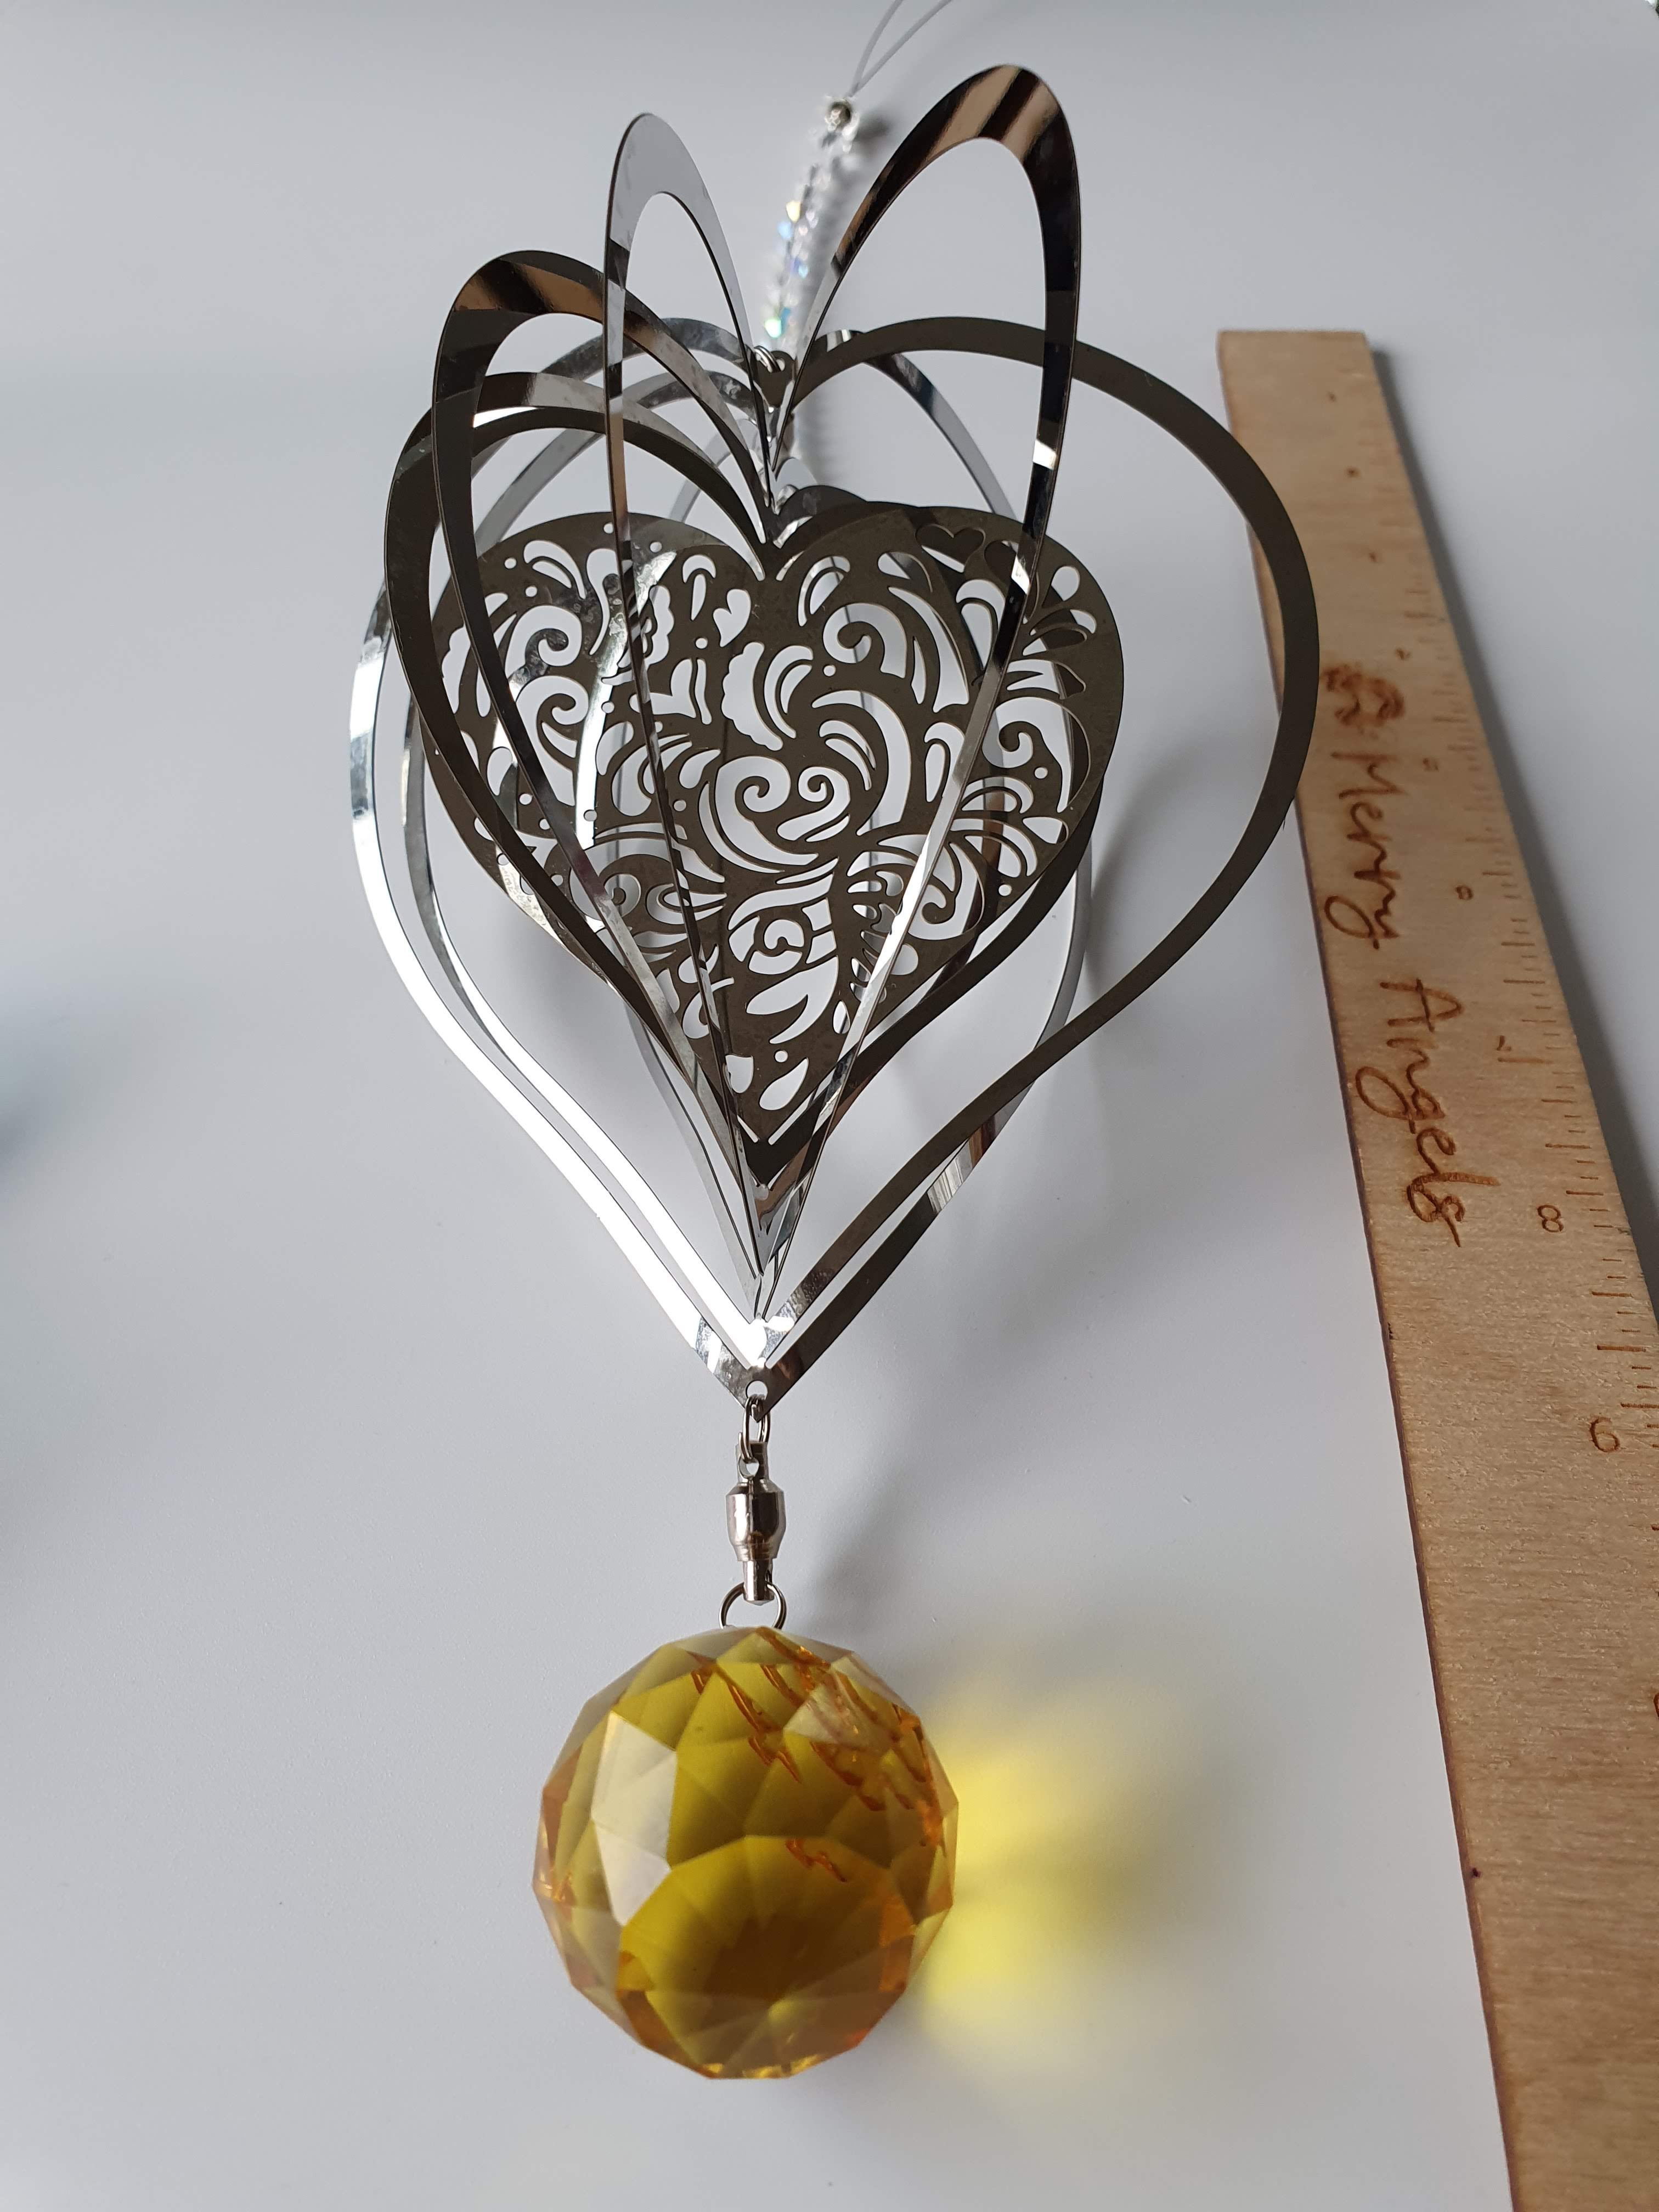 Heart shaped wind spinner with yellow glass crystal